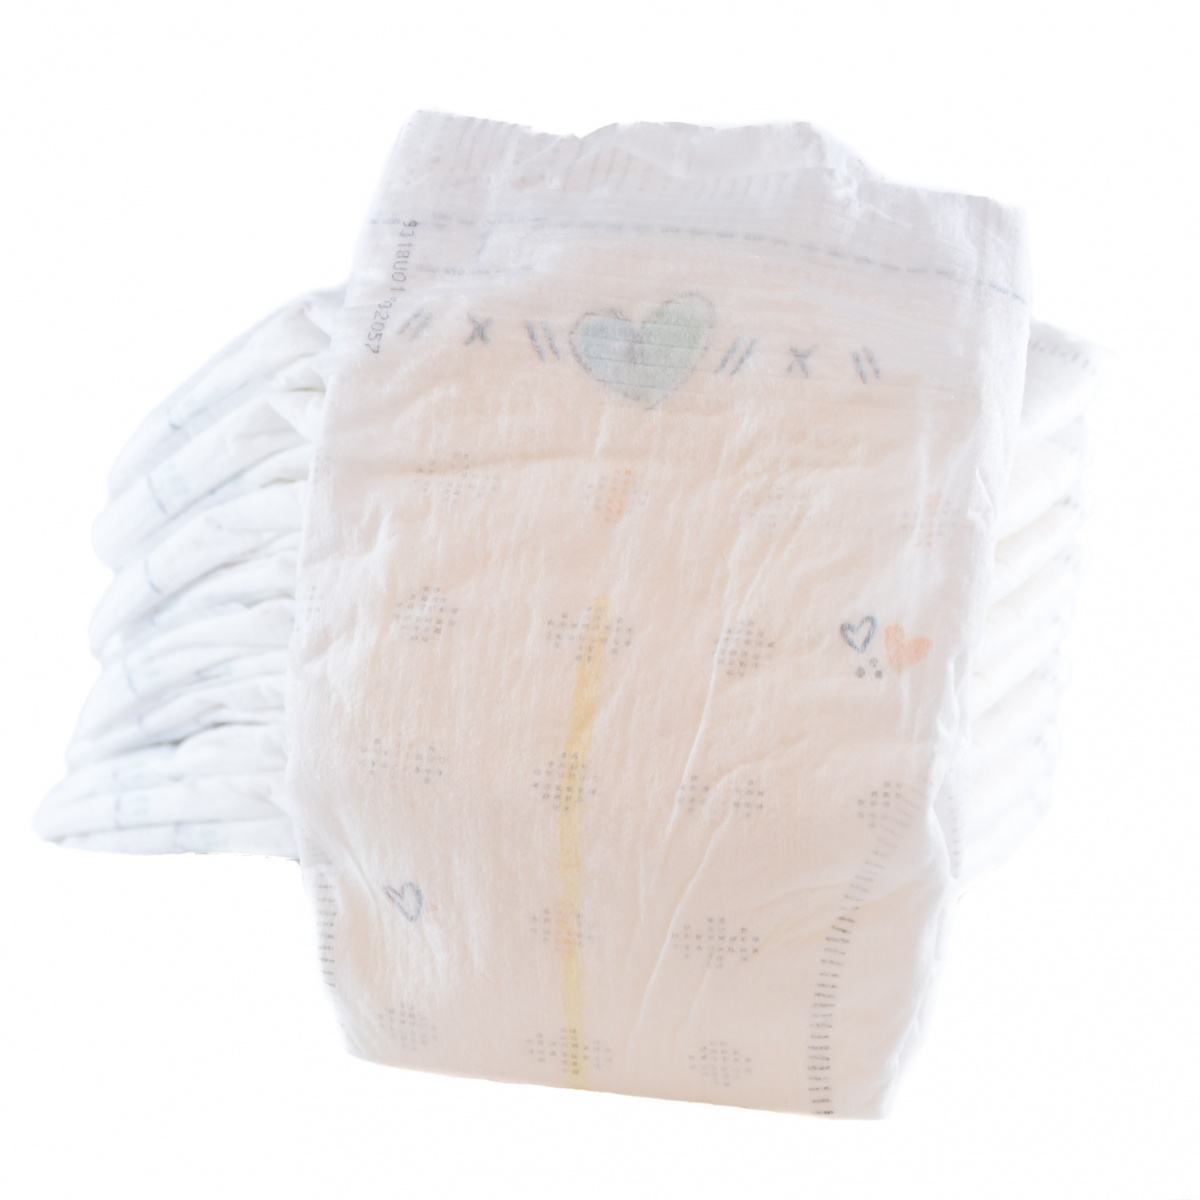 Pampers Pure Protection Diapers Review, The struggle to find the perfect  diaper is REAL. How many brands of diapers are you/did you consider? Pampers  Pure disposable diapers are one of the